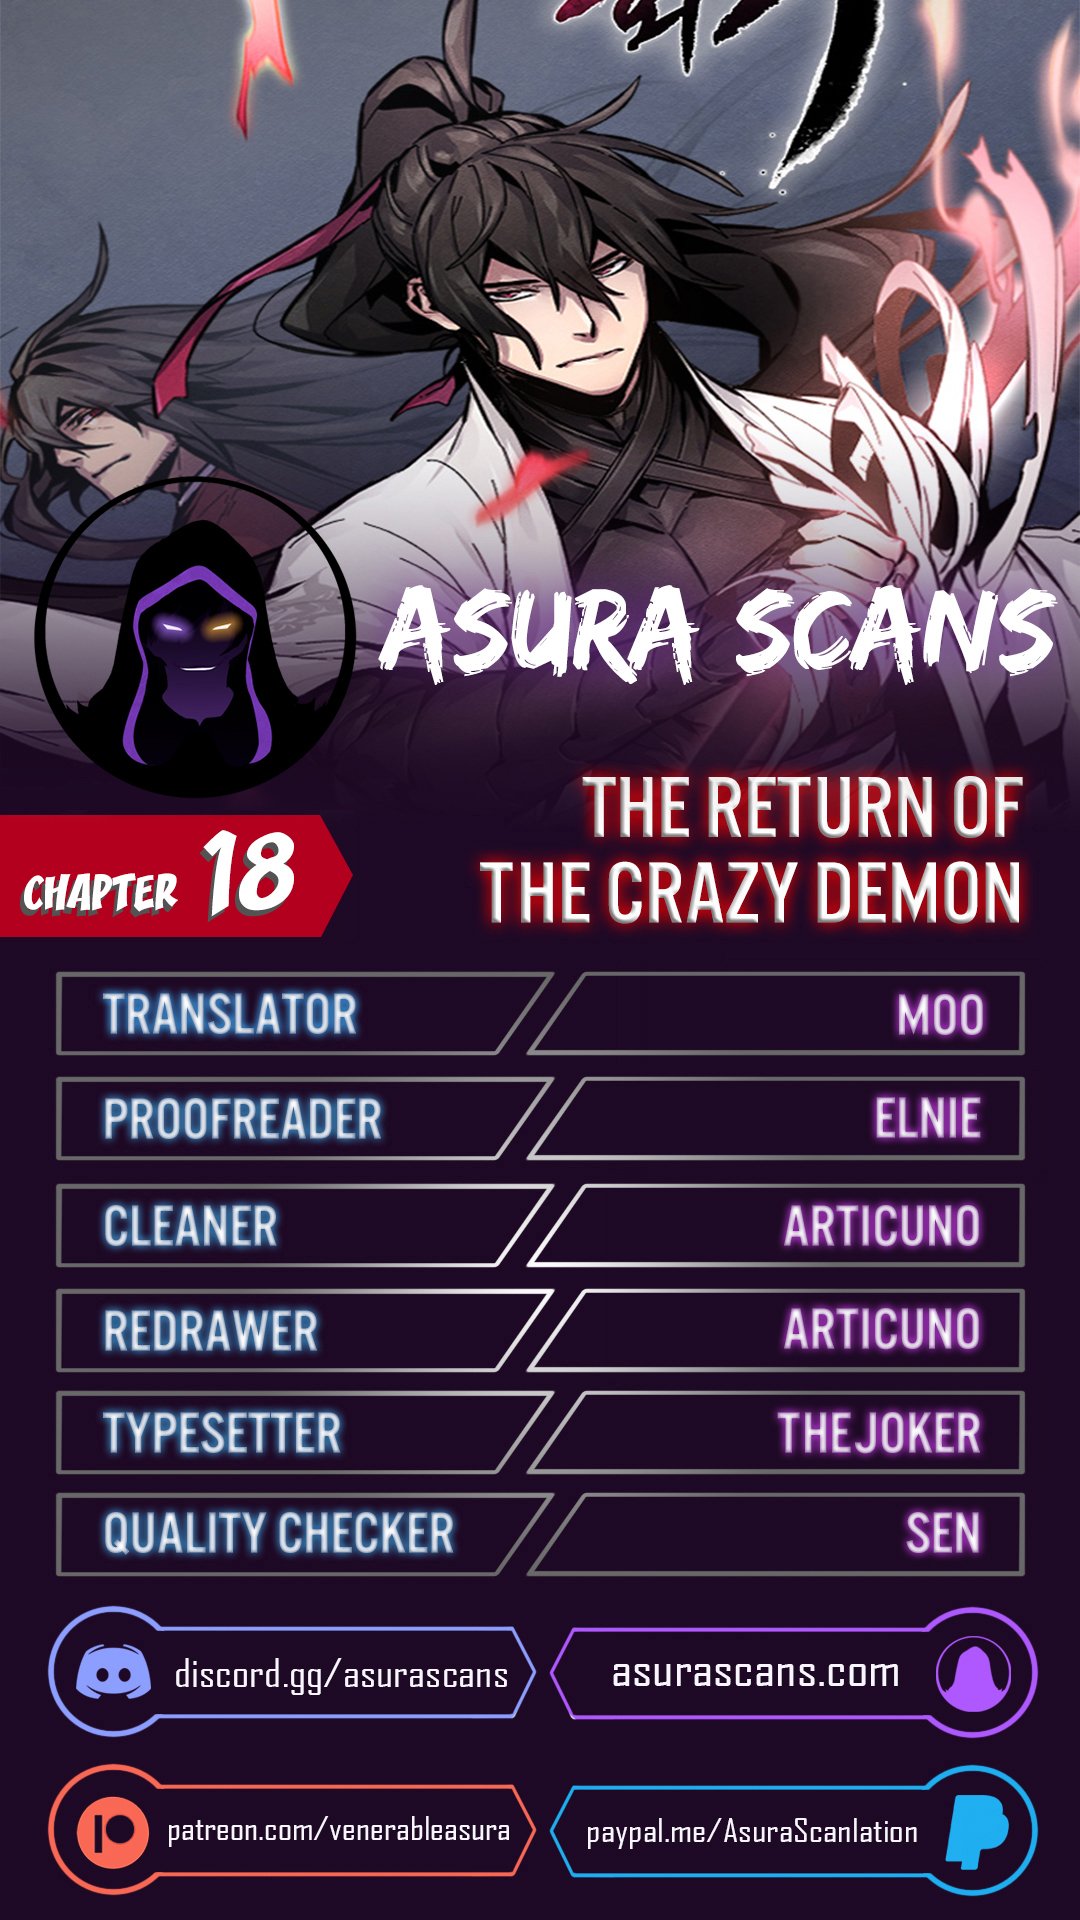 The Return of the Crazy Demon - Chapter 18559 - Image 1